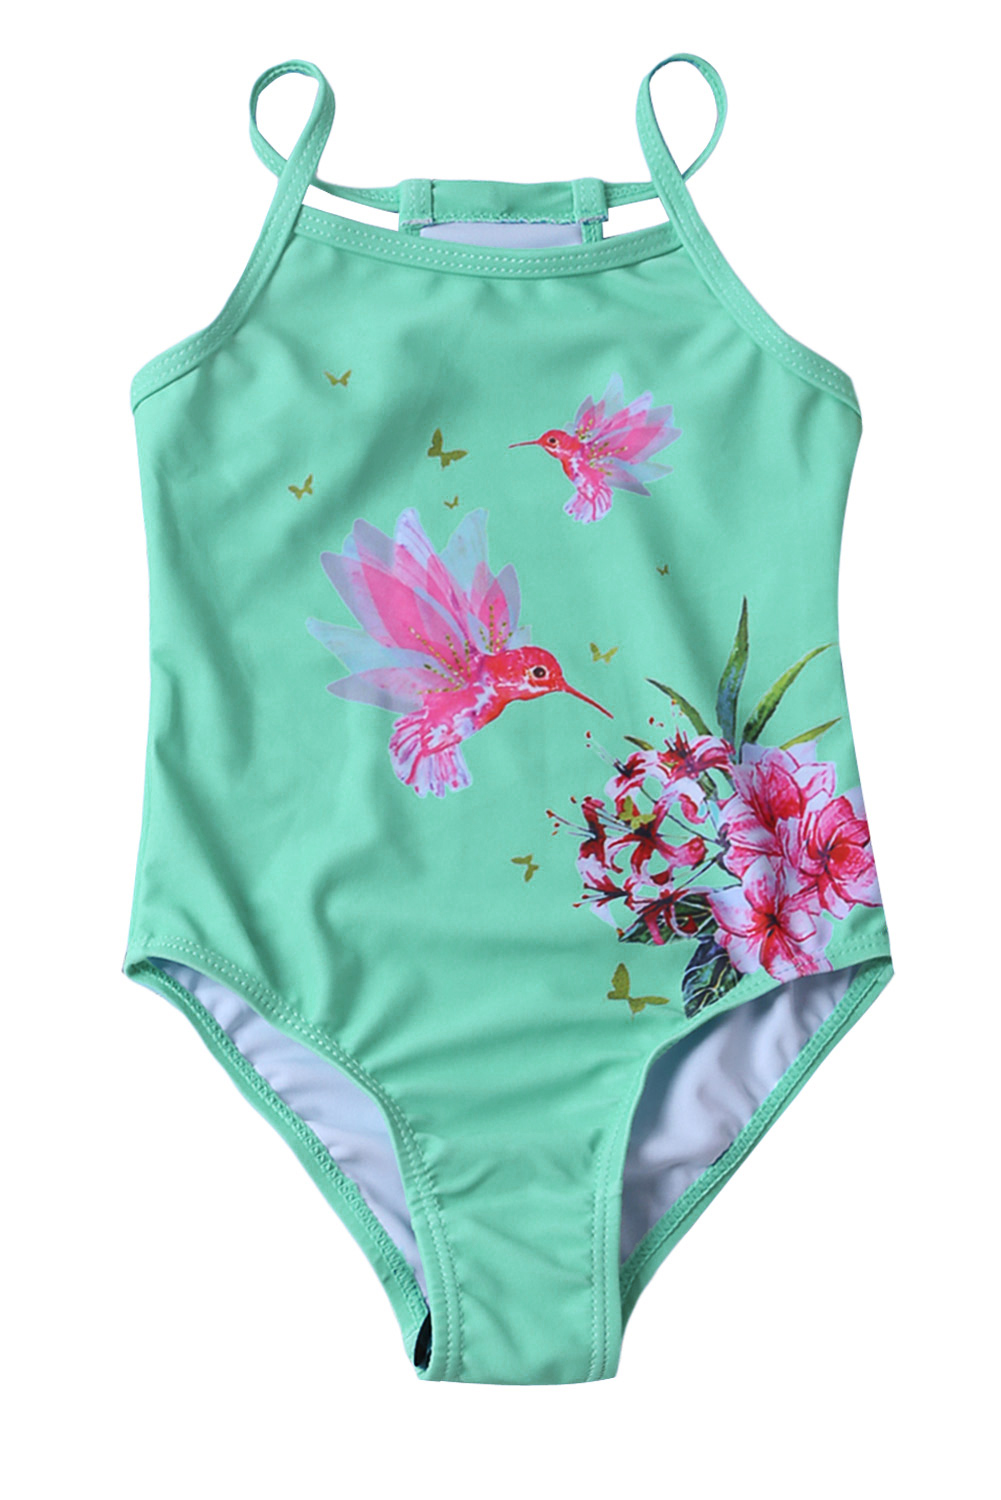 Wholesale $0.99 Clearance Sale, Cheap Mint Floral and Birds Little Girls One-piece Swimwear Online